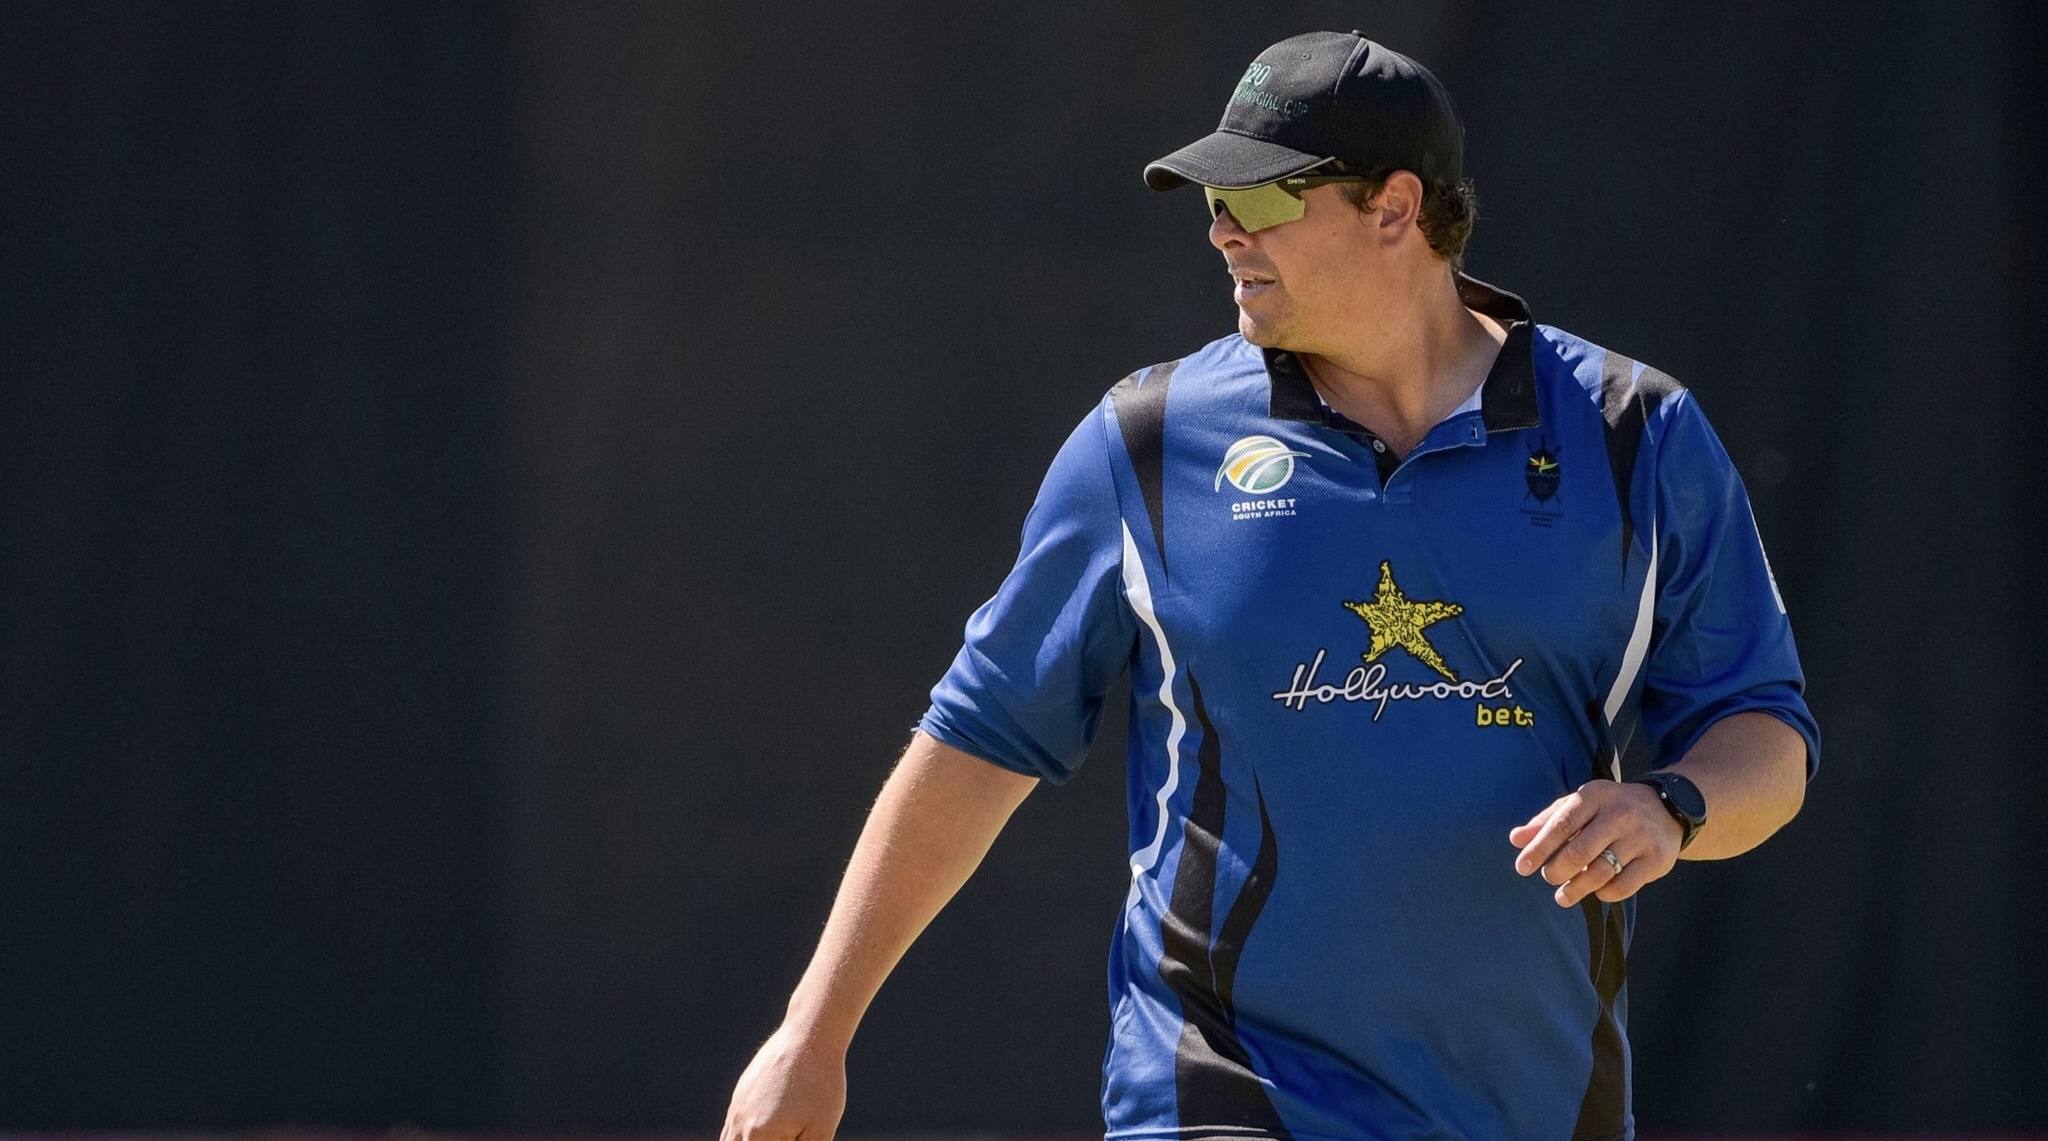 EASTERNS, EP, BORDER AND KZNI REACH PROVINCIAL T20 SEMIS